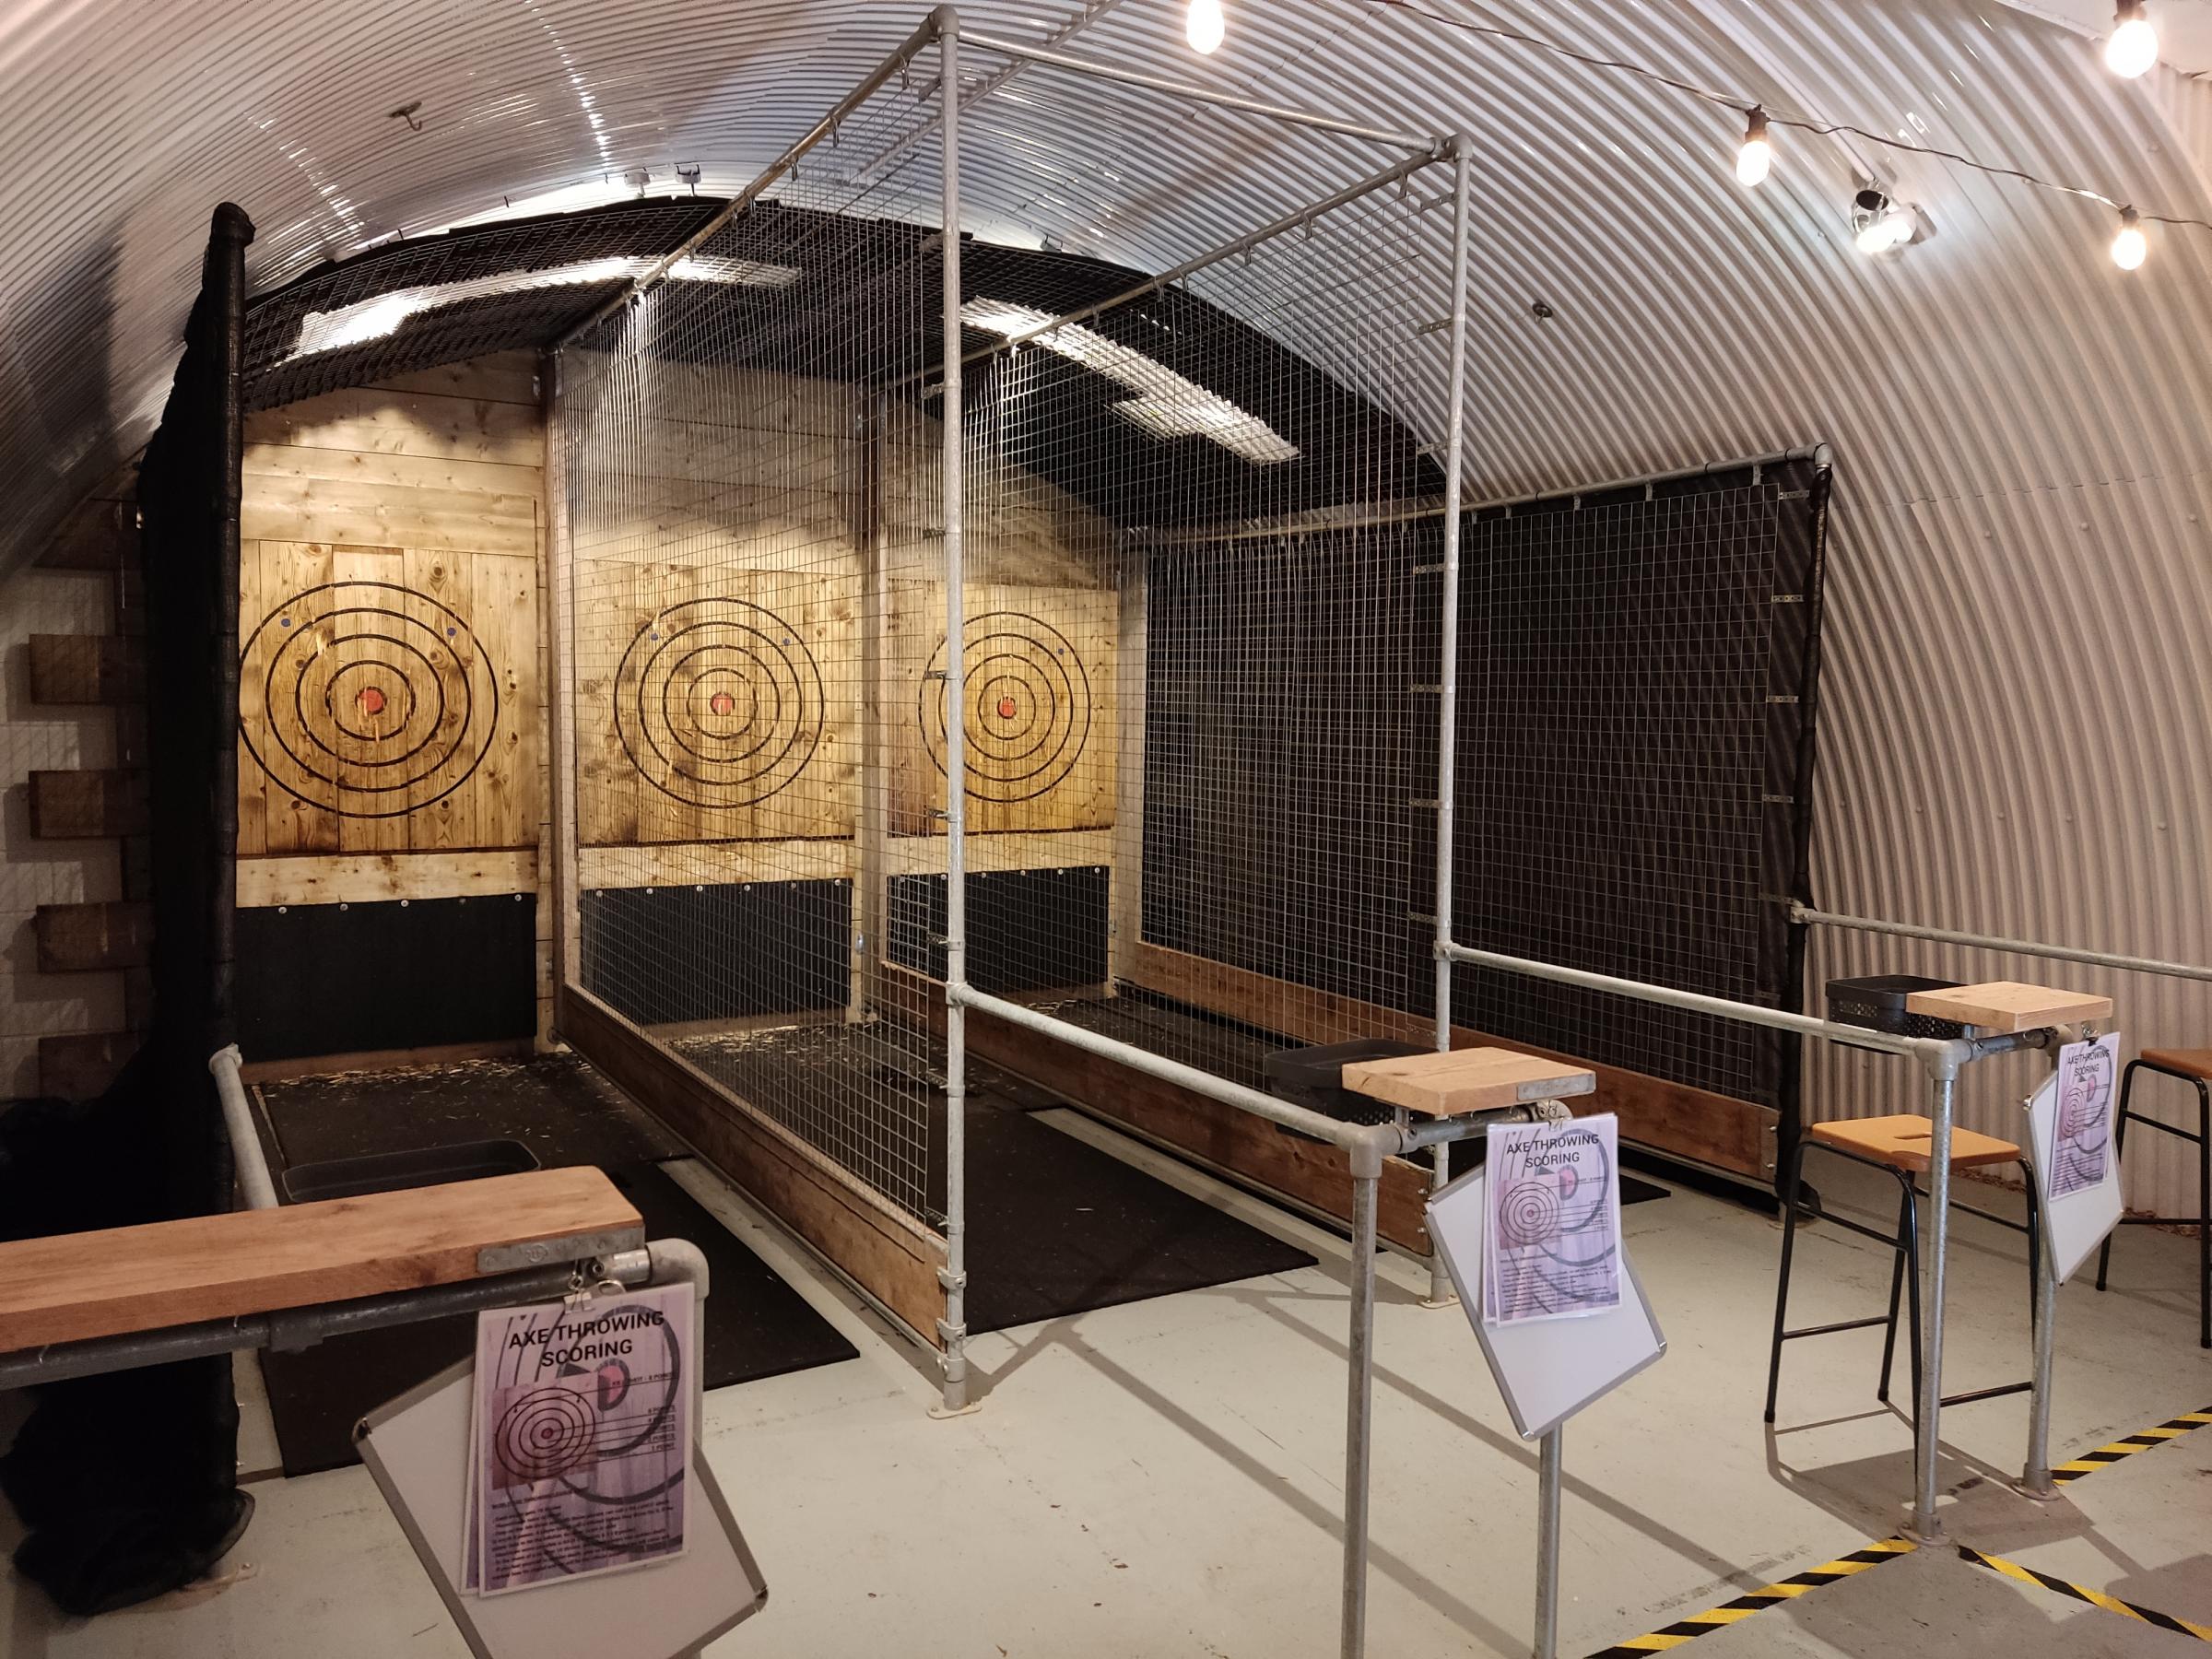 VAULTED AMBITION: The axe-throwing range